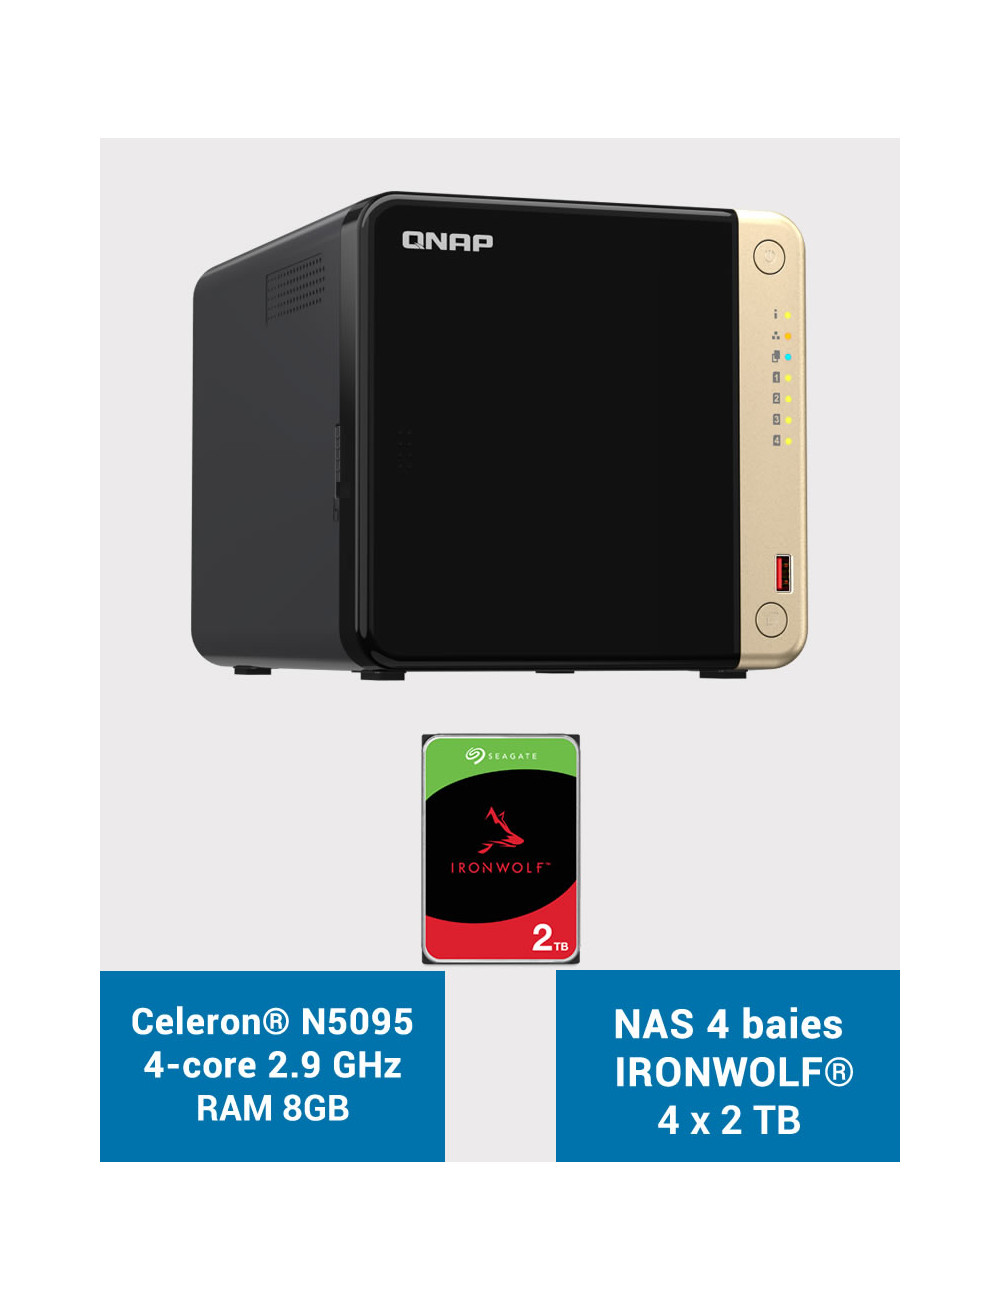 QNAP TS-464 8GB Serveur NAS 4 baies IRONWOLF 8To (4x2To)